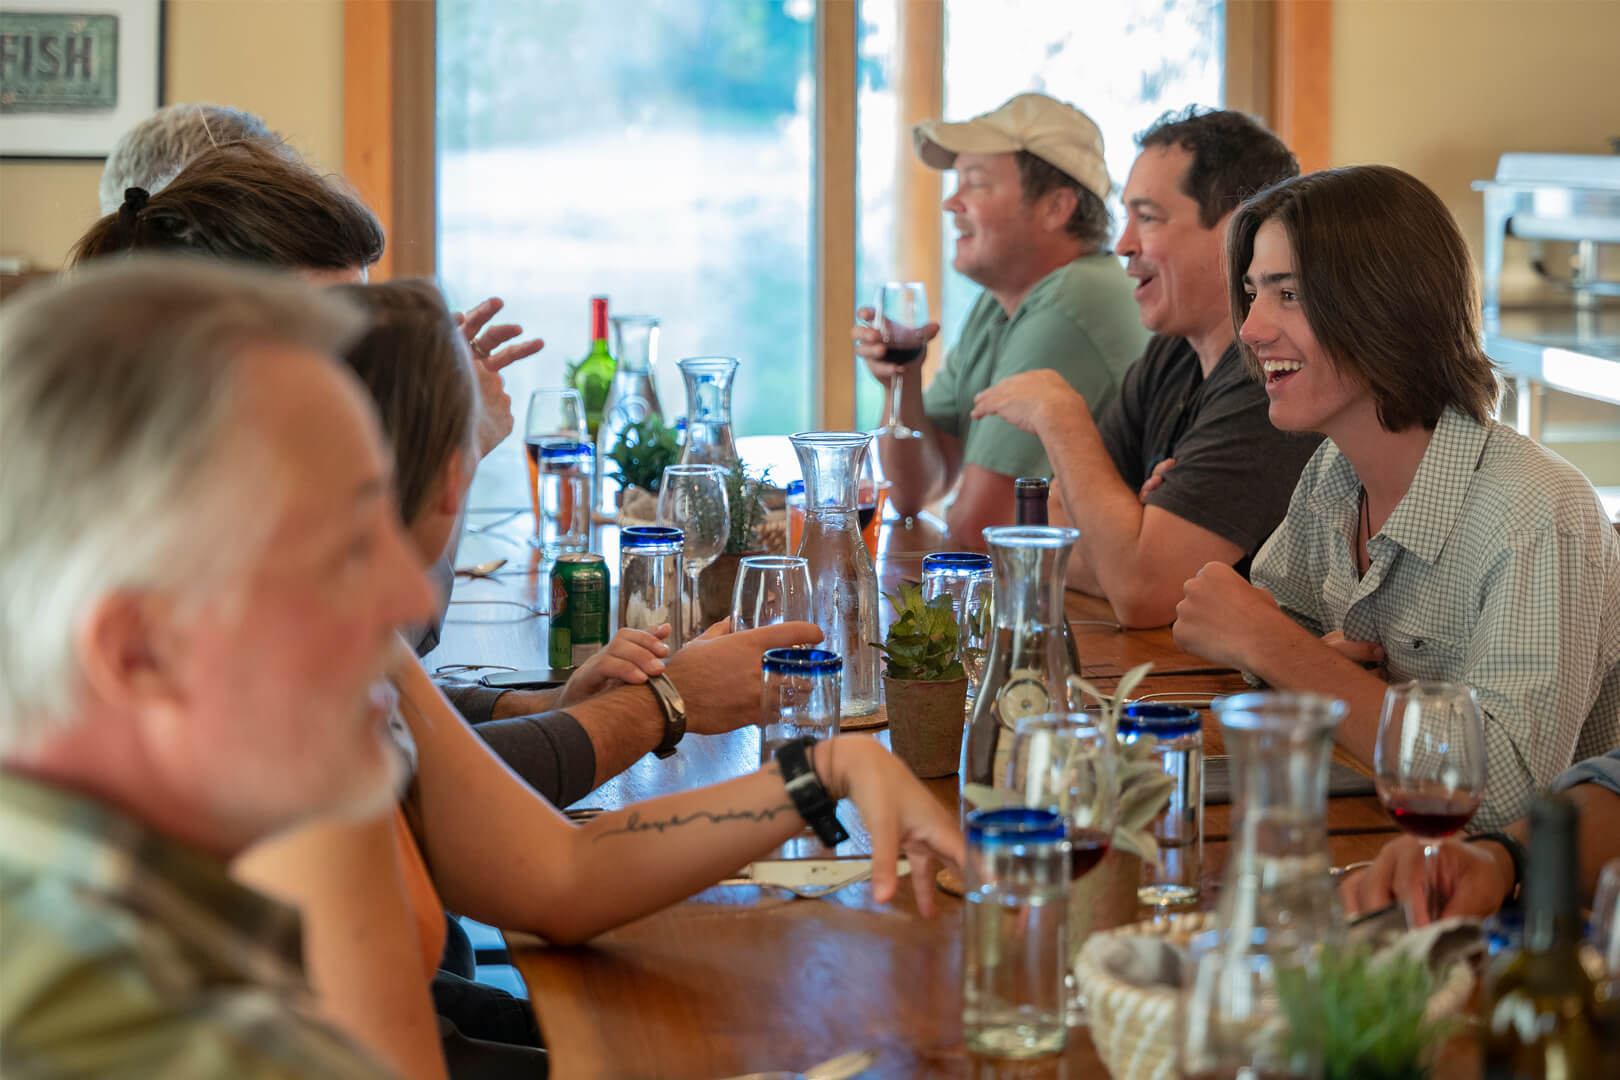 Get together and build camaraderie in every dining experience at BRL